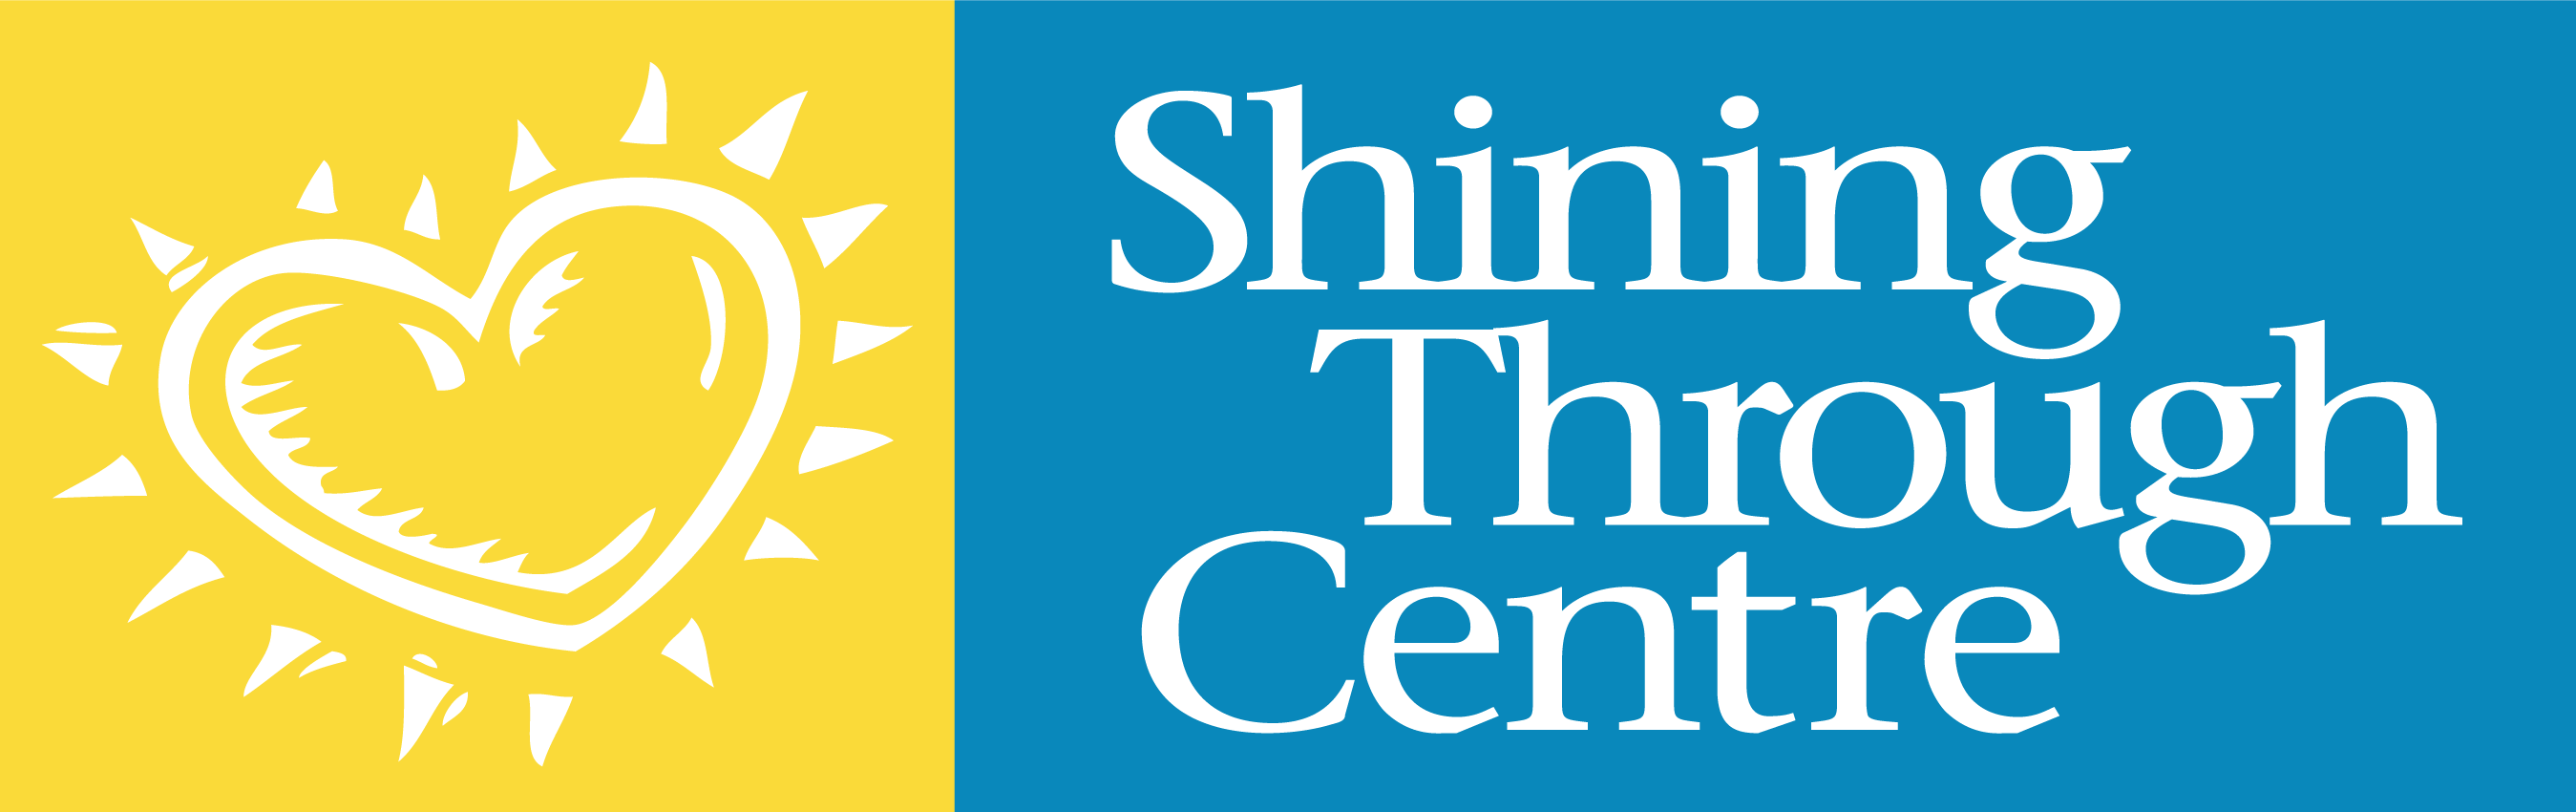 SHINING THROUGH CENTRE FOR CHILDREN WITH AUTISM logo